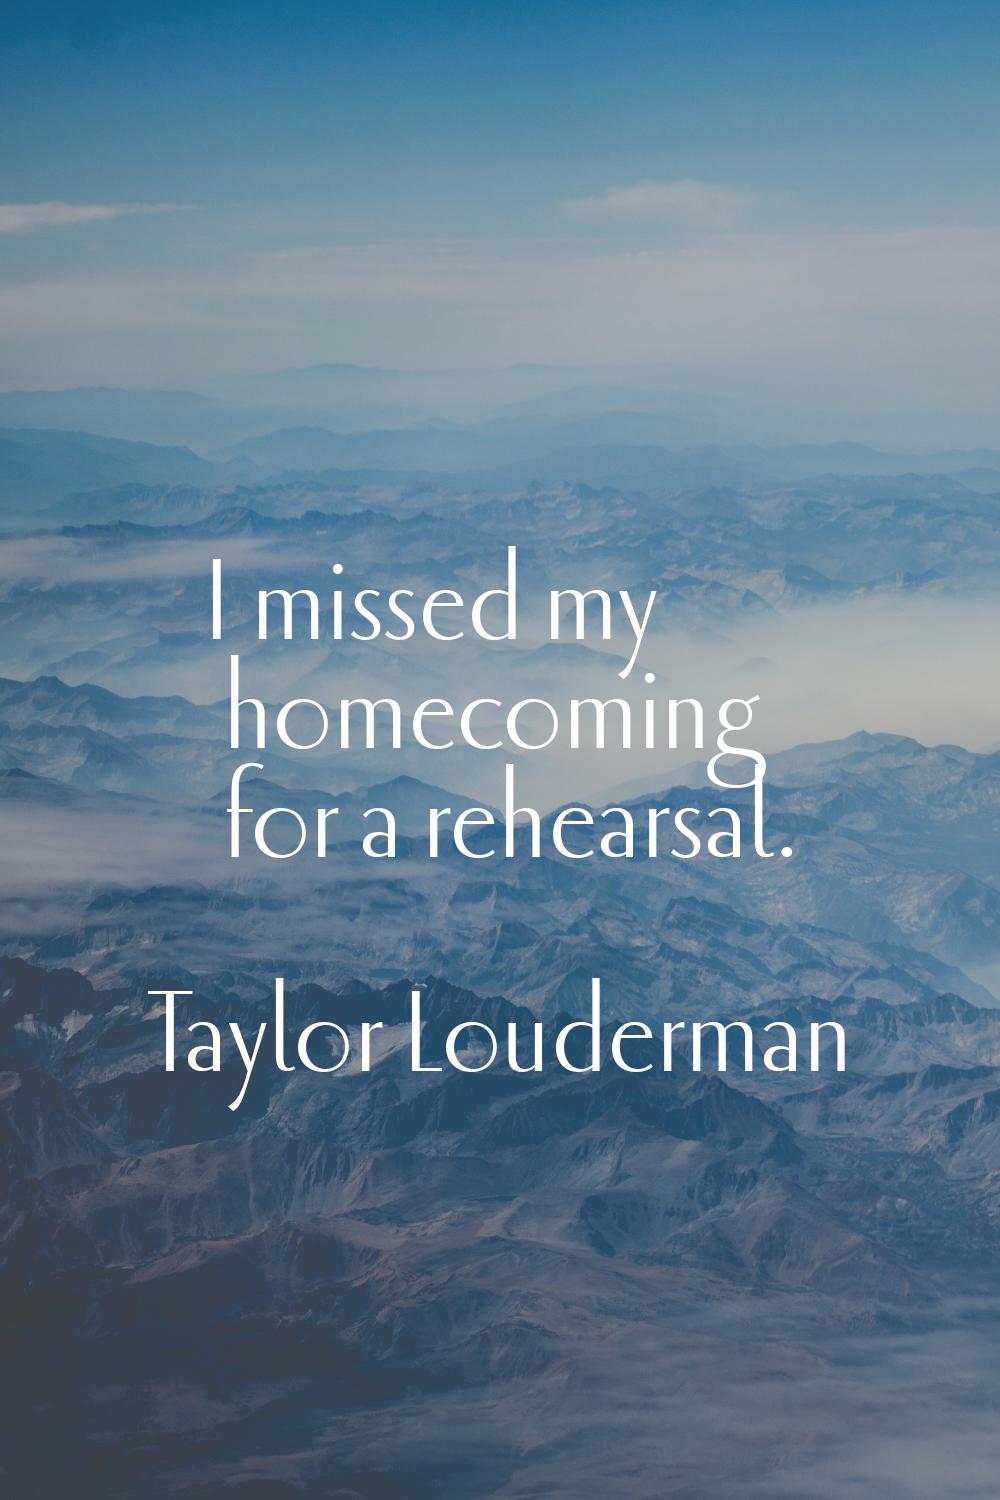 I missed my homecoming for a rehearsal.